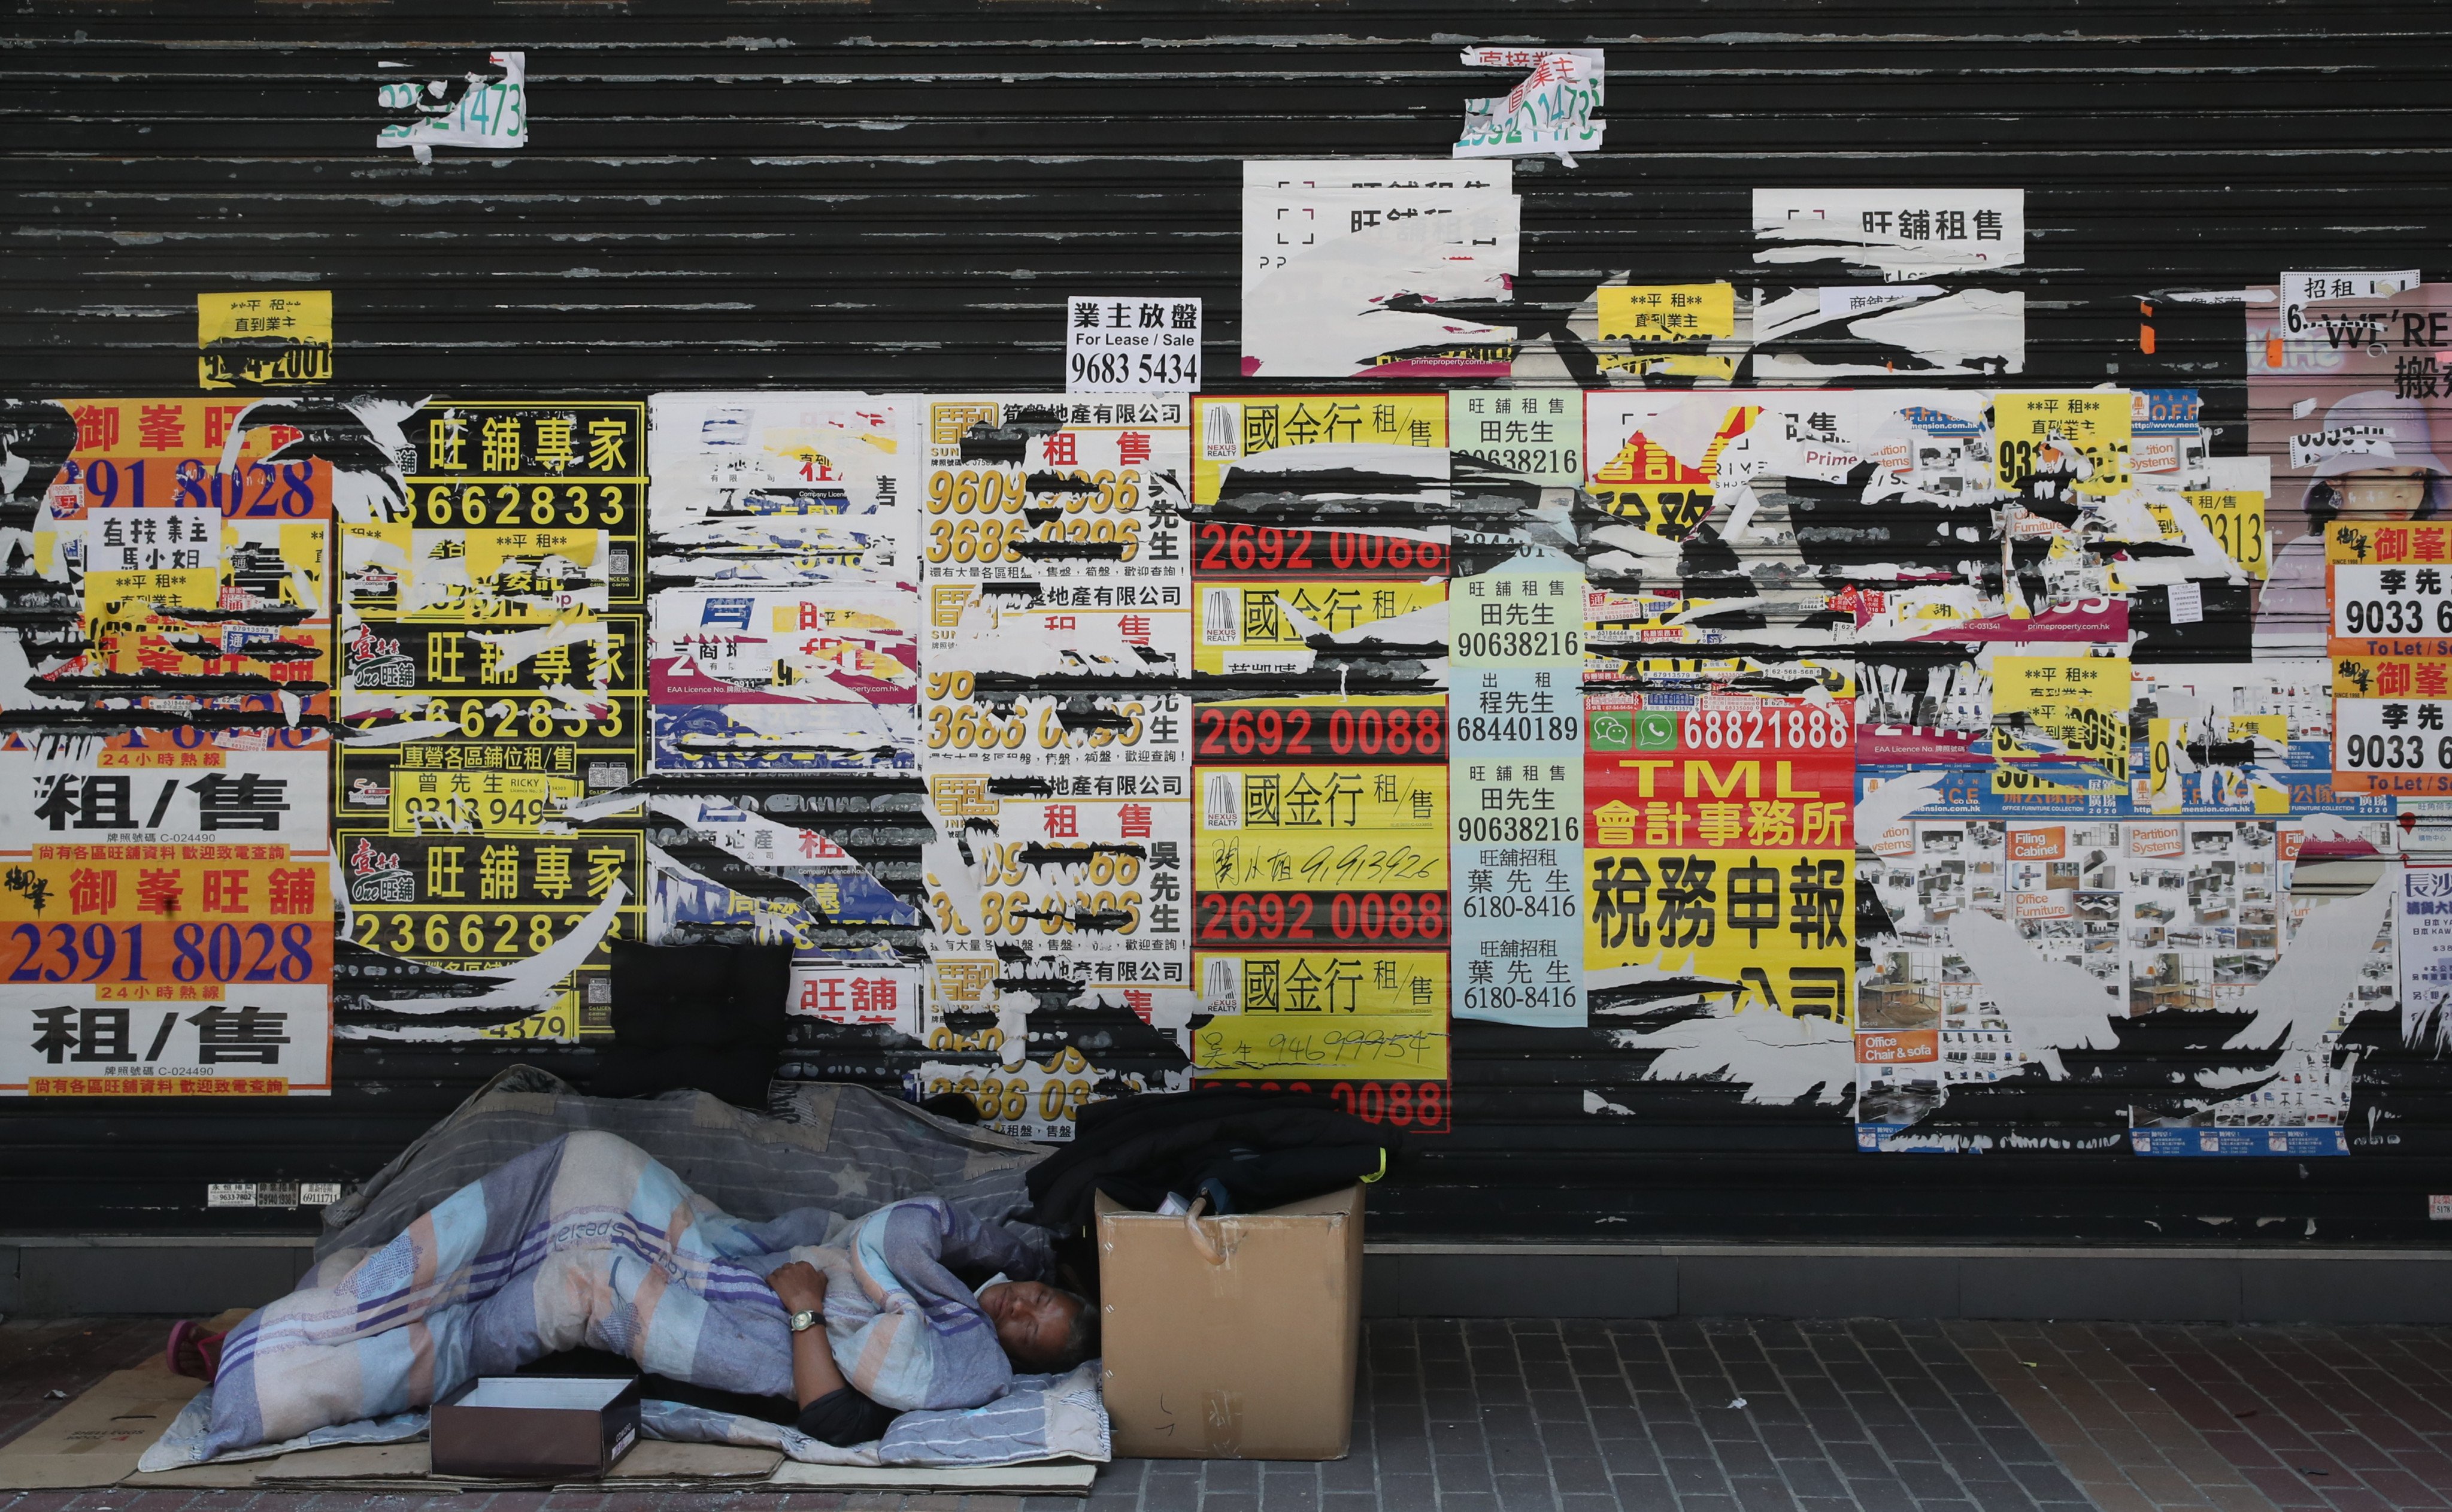 A homeless man sleeps in front of a shuttered shop in Mong Kok in April 2022. Photo: Edmond So